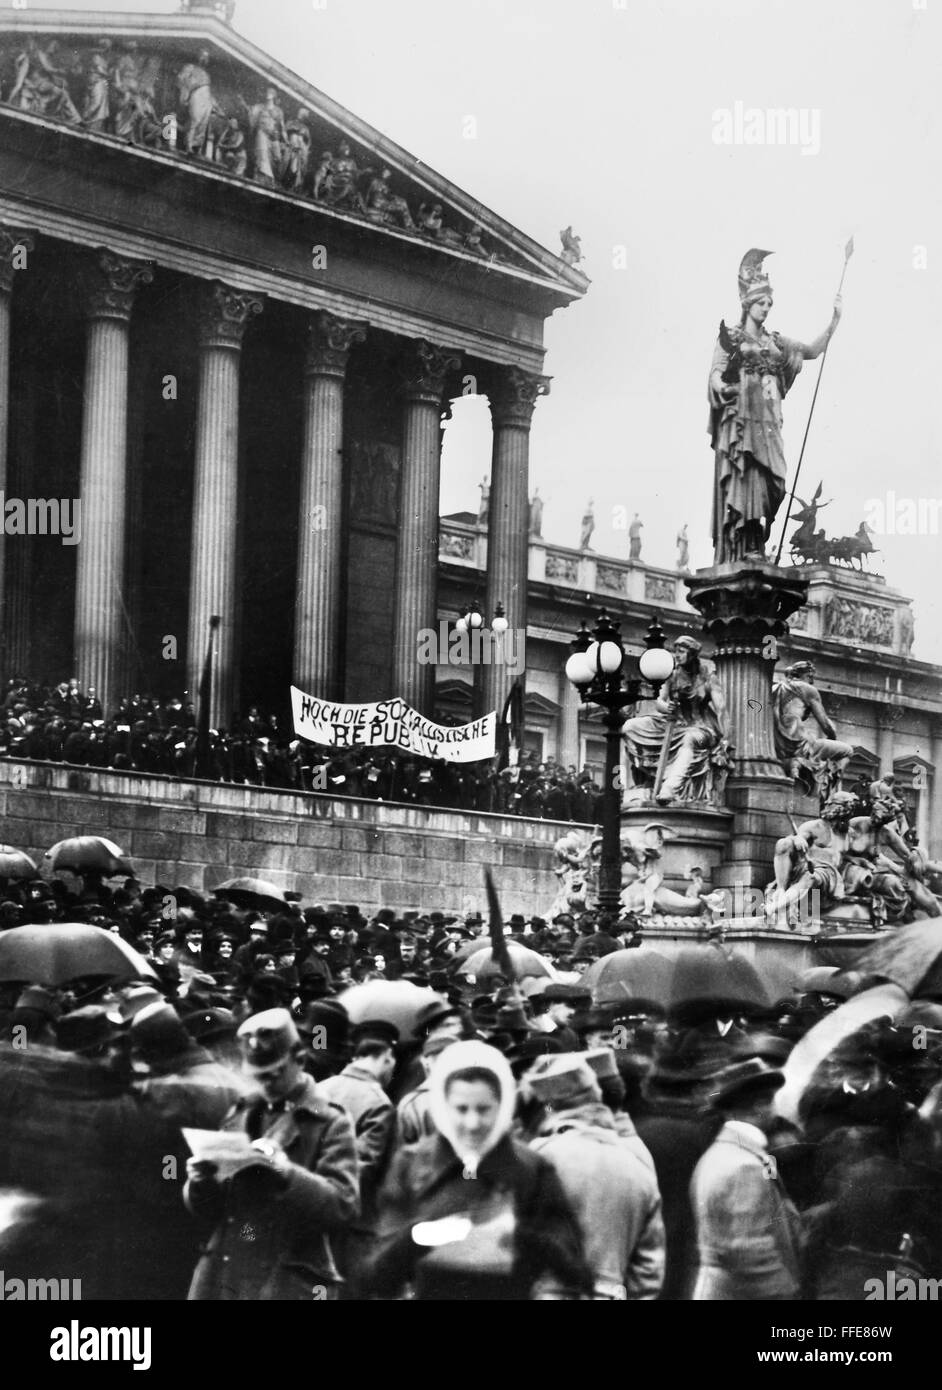 AUSTRIA: REPUBLIC, 1918. /nSocialist demonstration at the parliament building in Vienna on the occasion of the proclamation of the Austrian Republic, 12 November 1918. Stock Photo